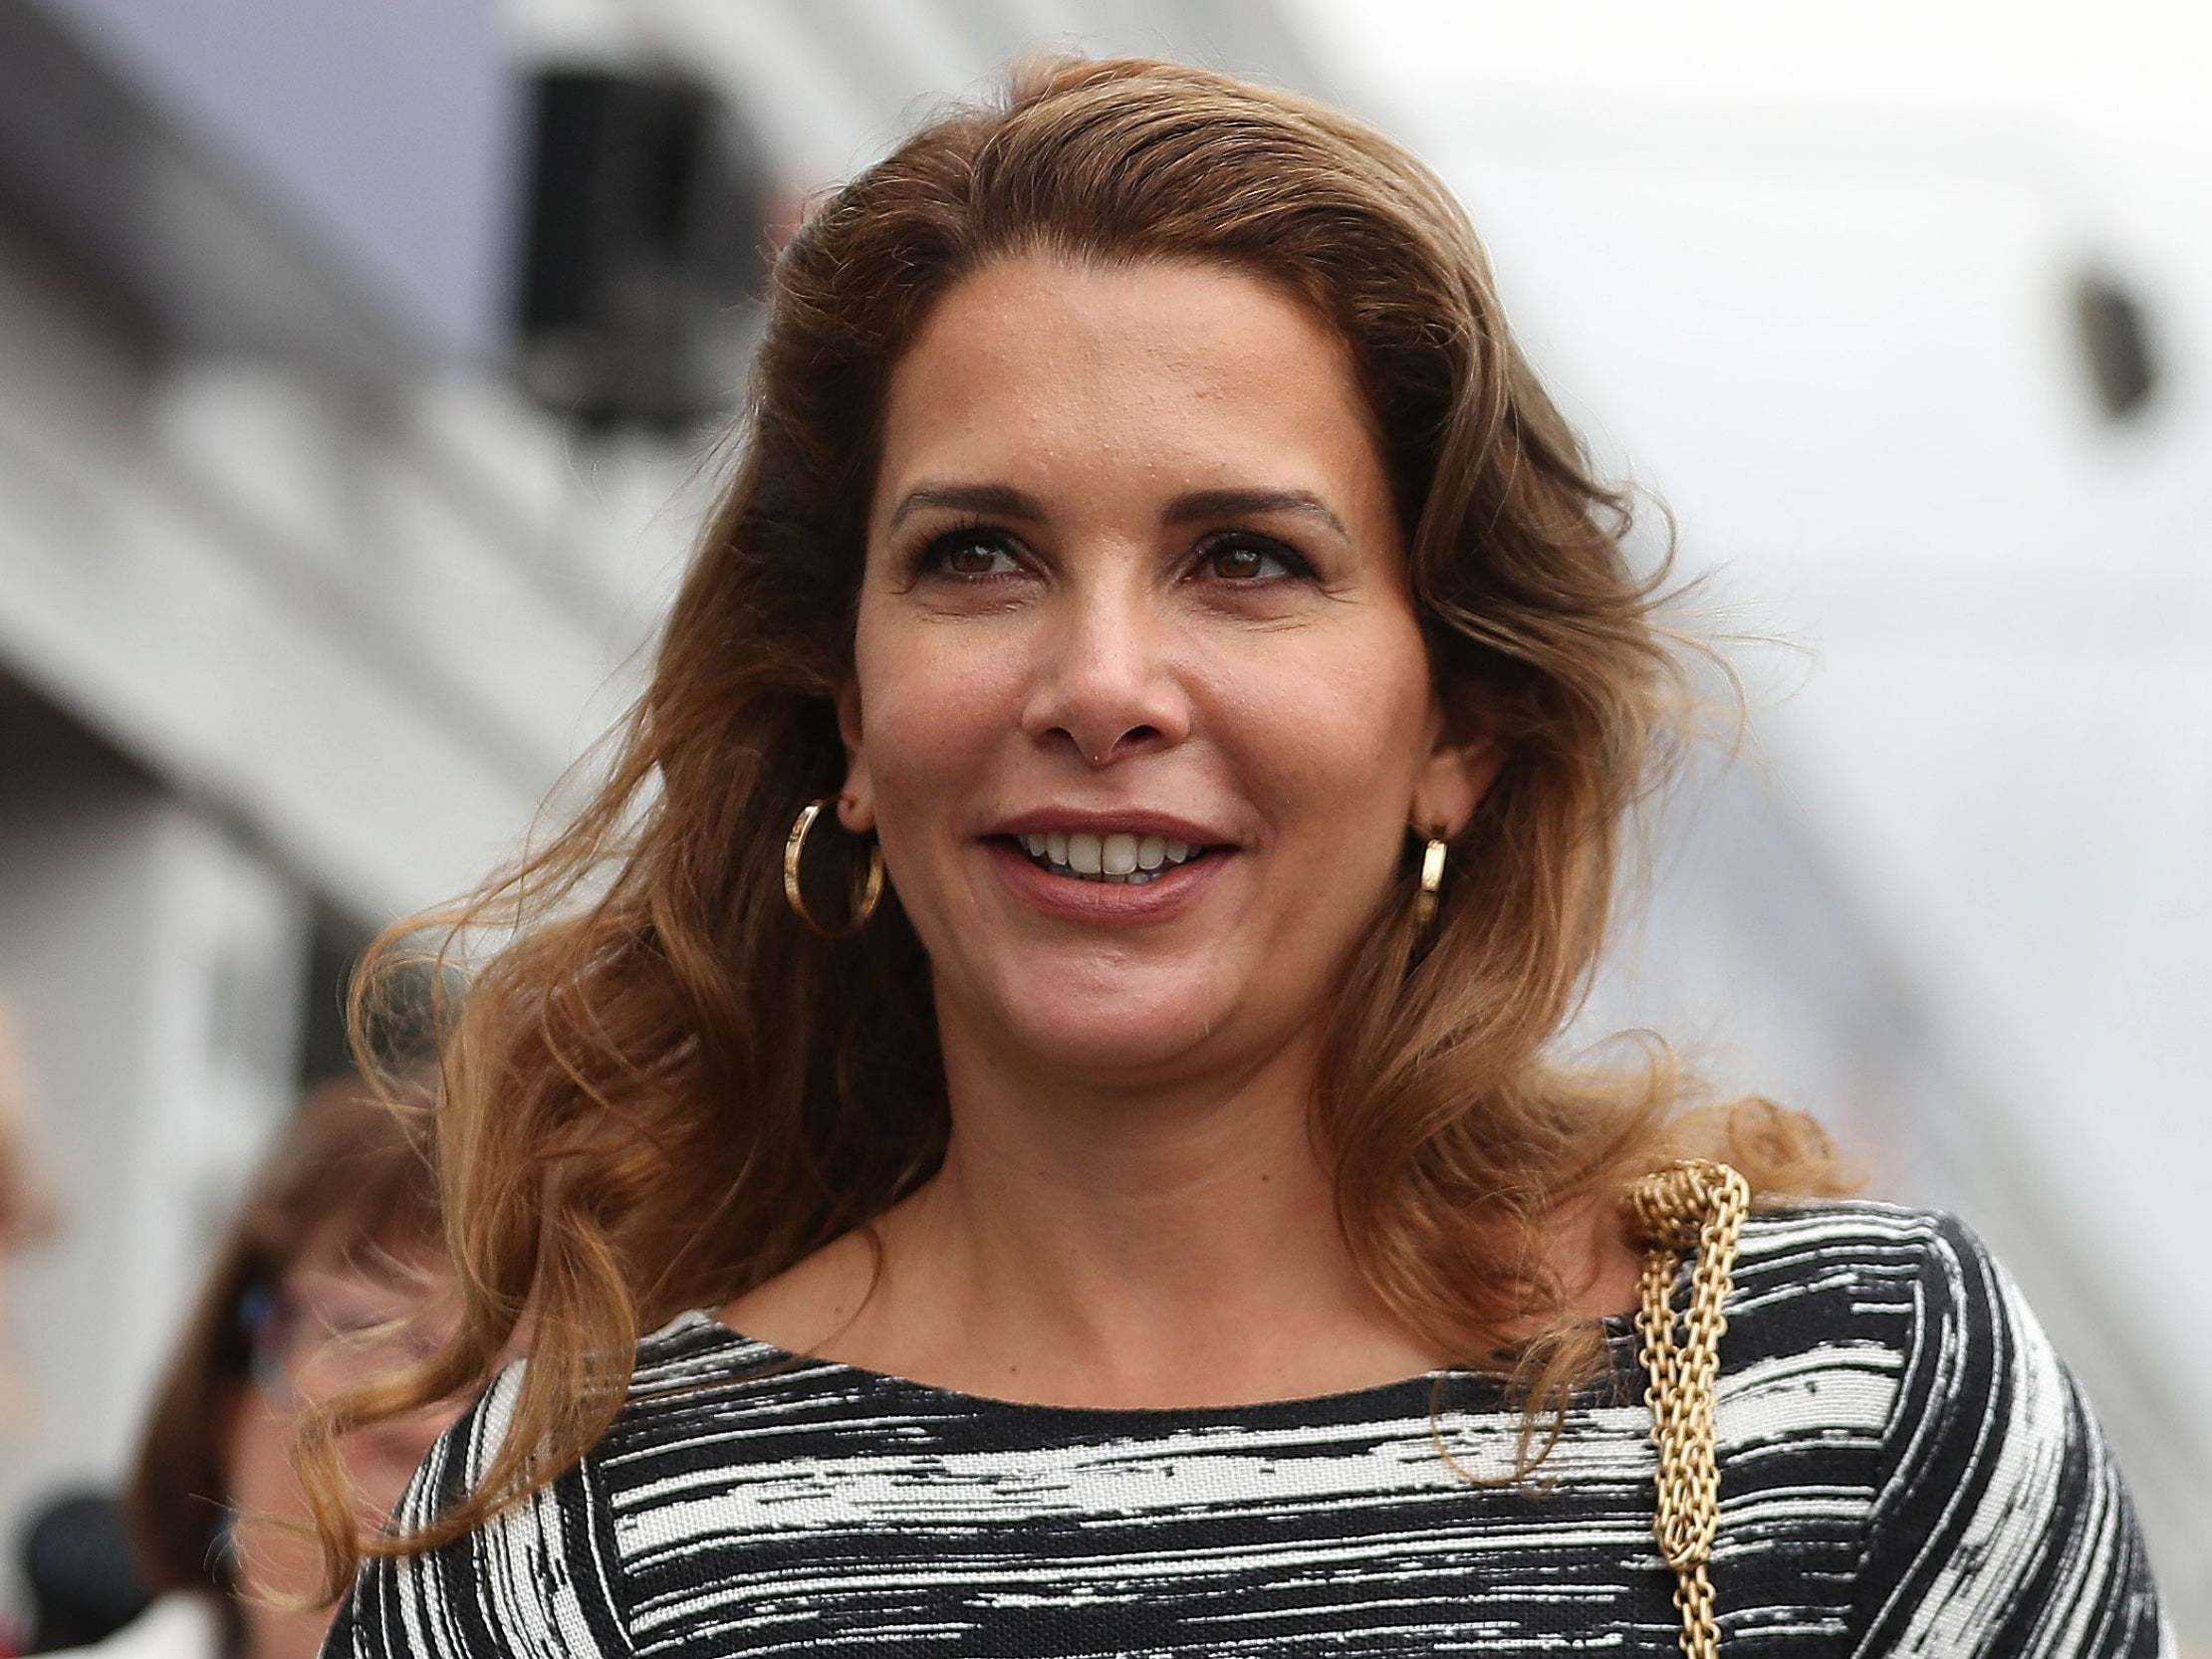 Dubai ruler's wife Princess Haya applies for forced marriage protection order in court battle over children